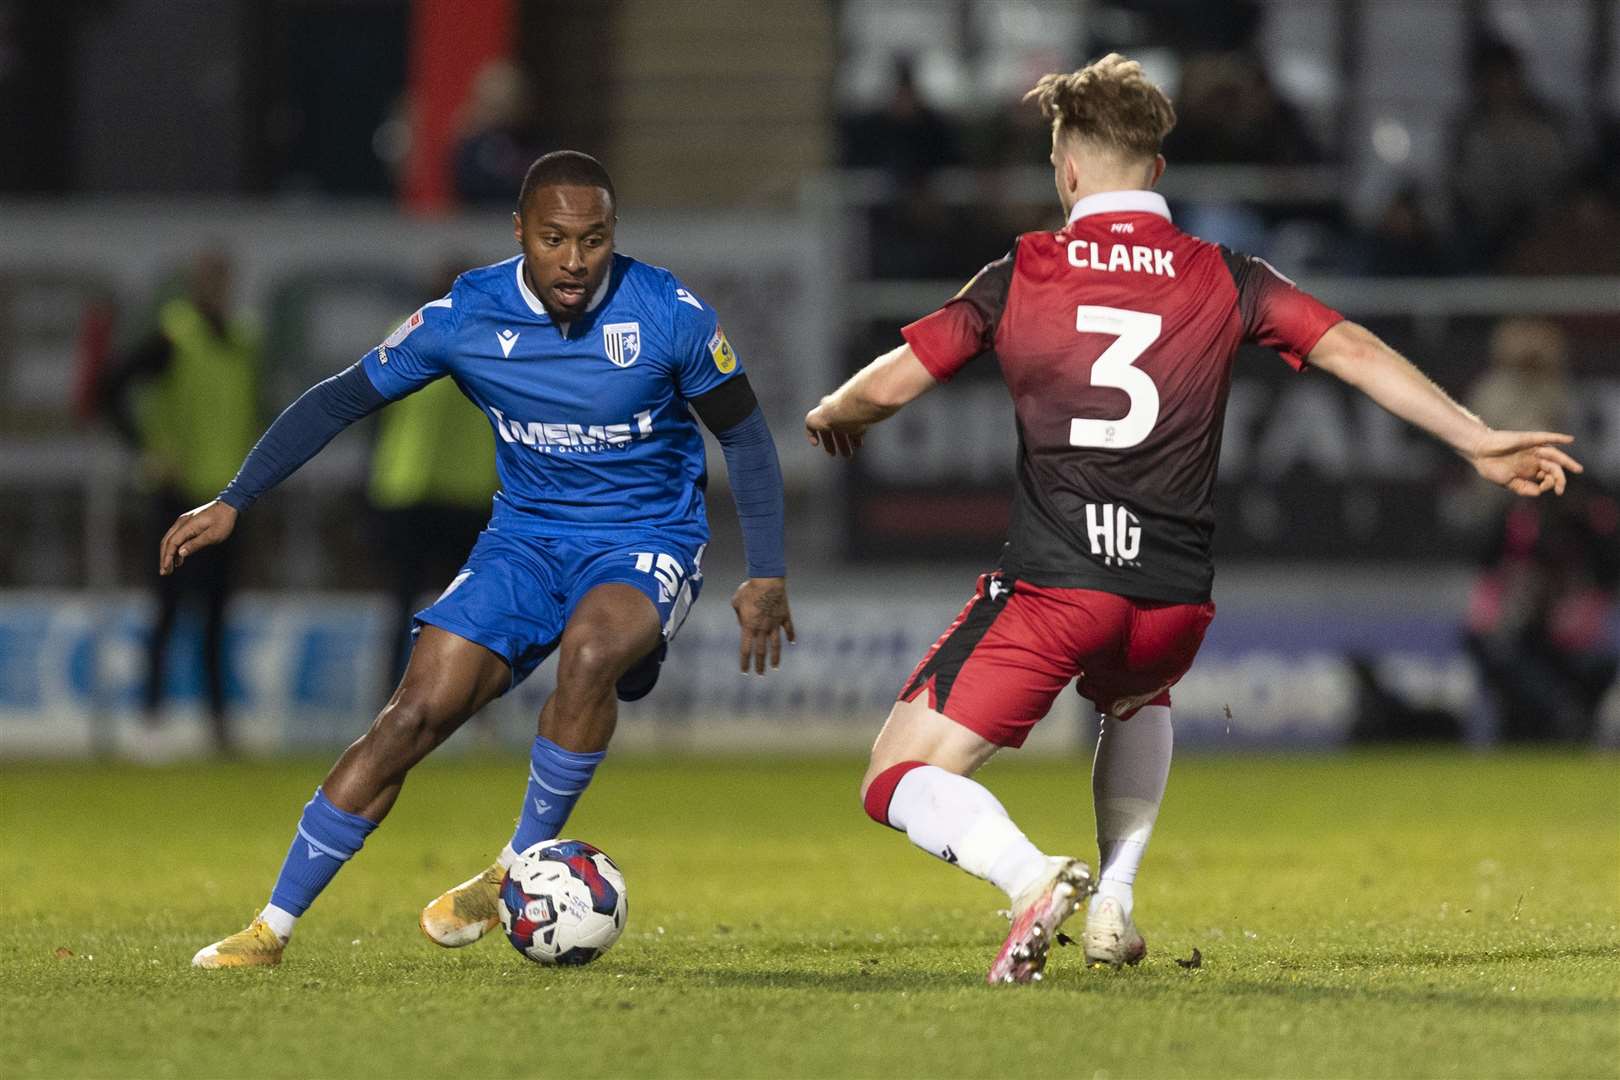 Callum Harriott is a free agent but manager Neil Harris hopes to keep him around